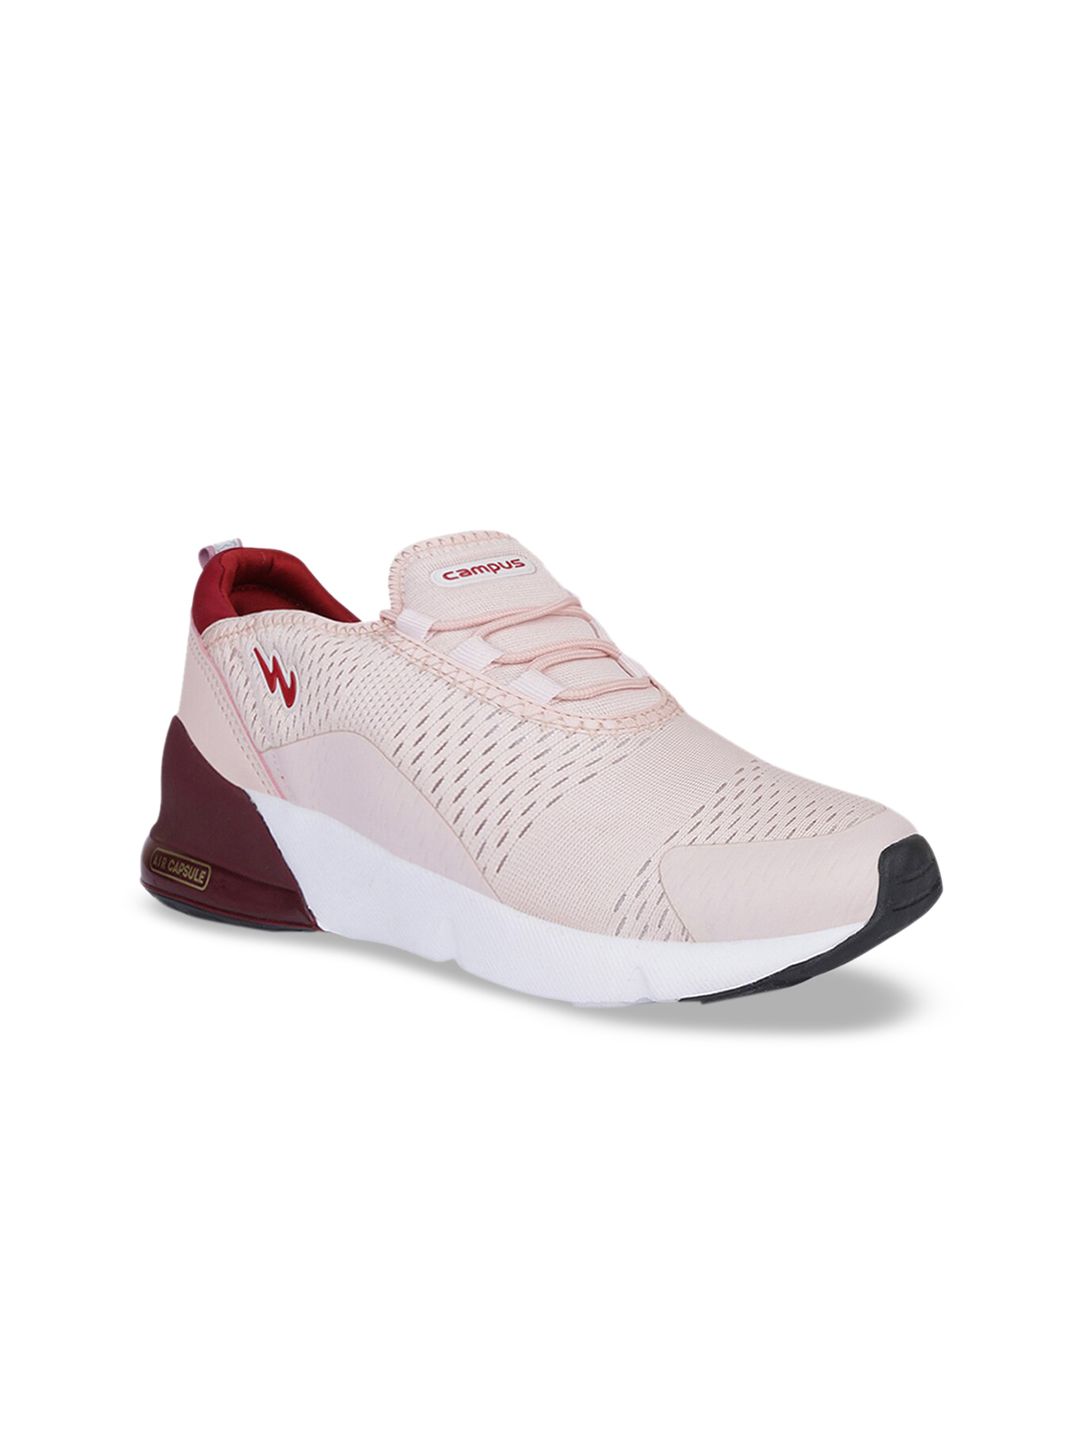 Campus Women Peach-Coloured Mesh Running Shoes Price in India